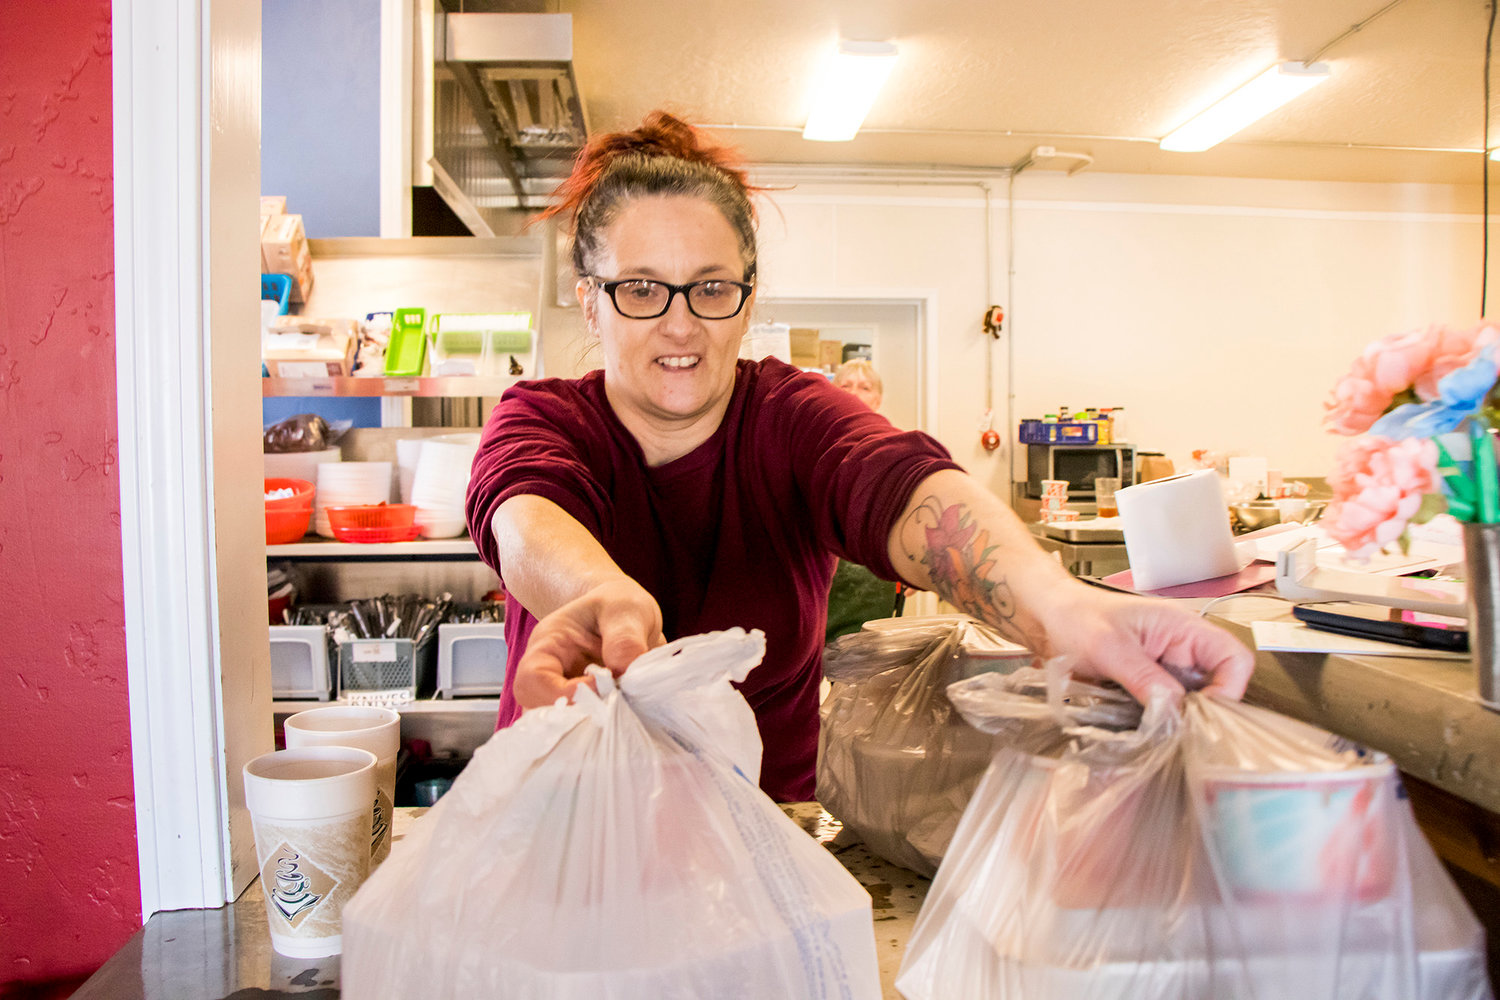 Bethanne Jones, Cafe Manager at Gather, sets up to-go meals Monday afternoon in Centralia.